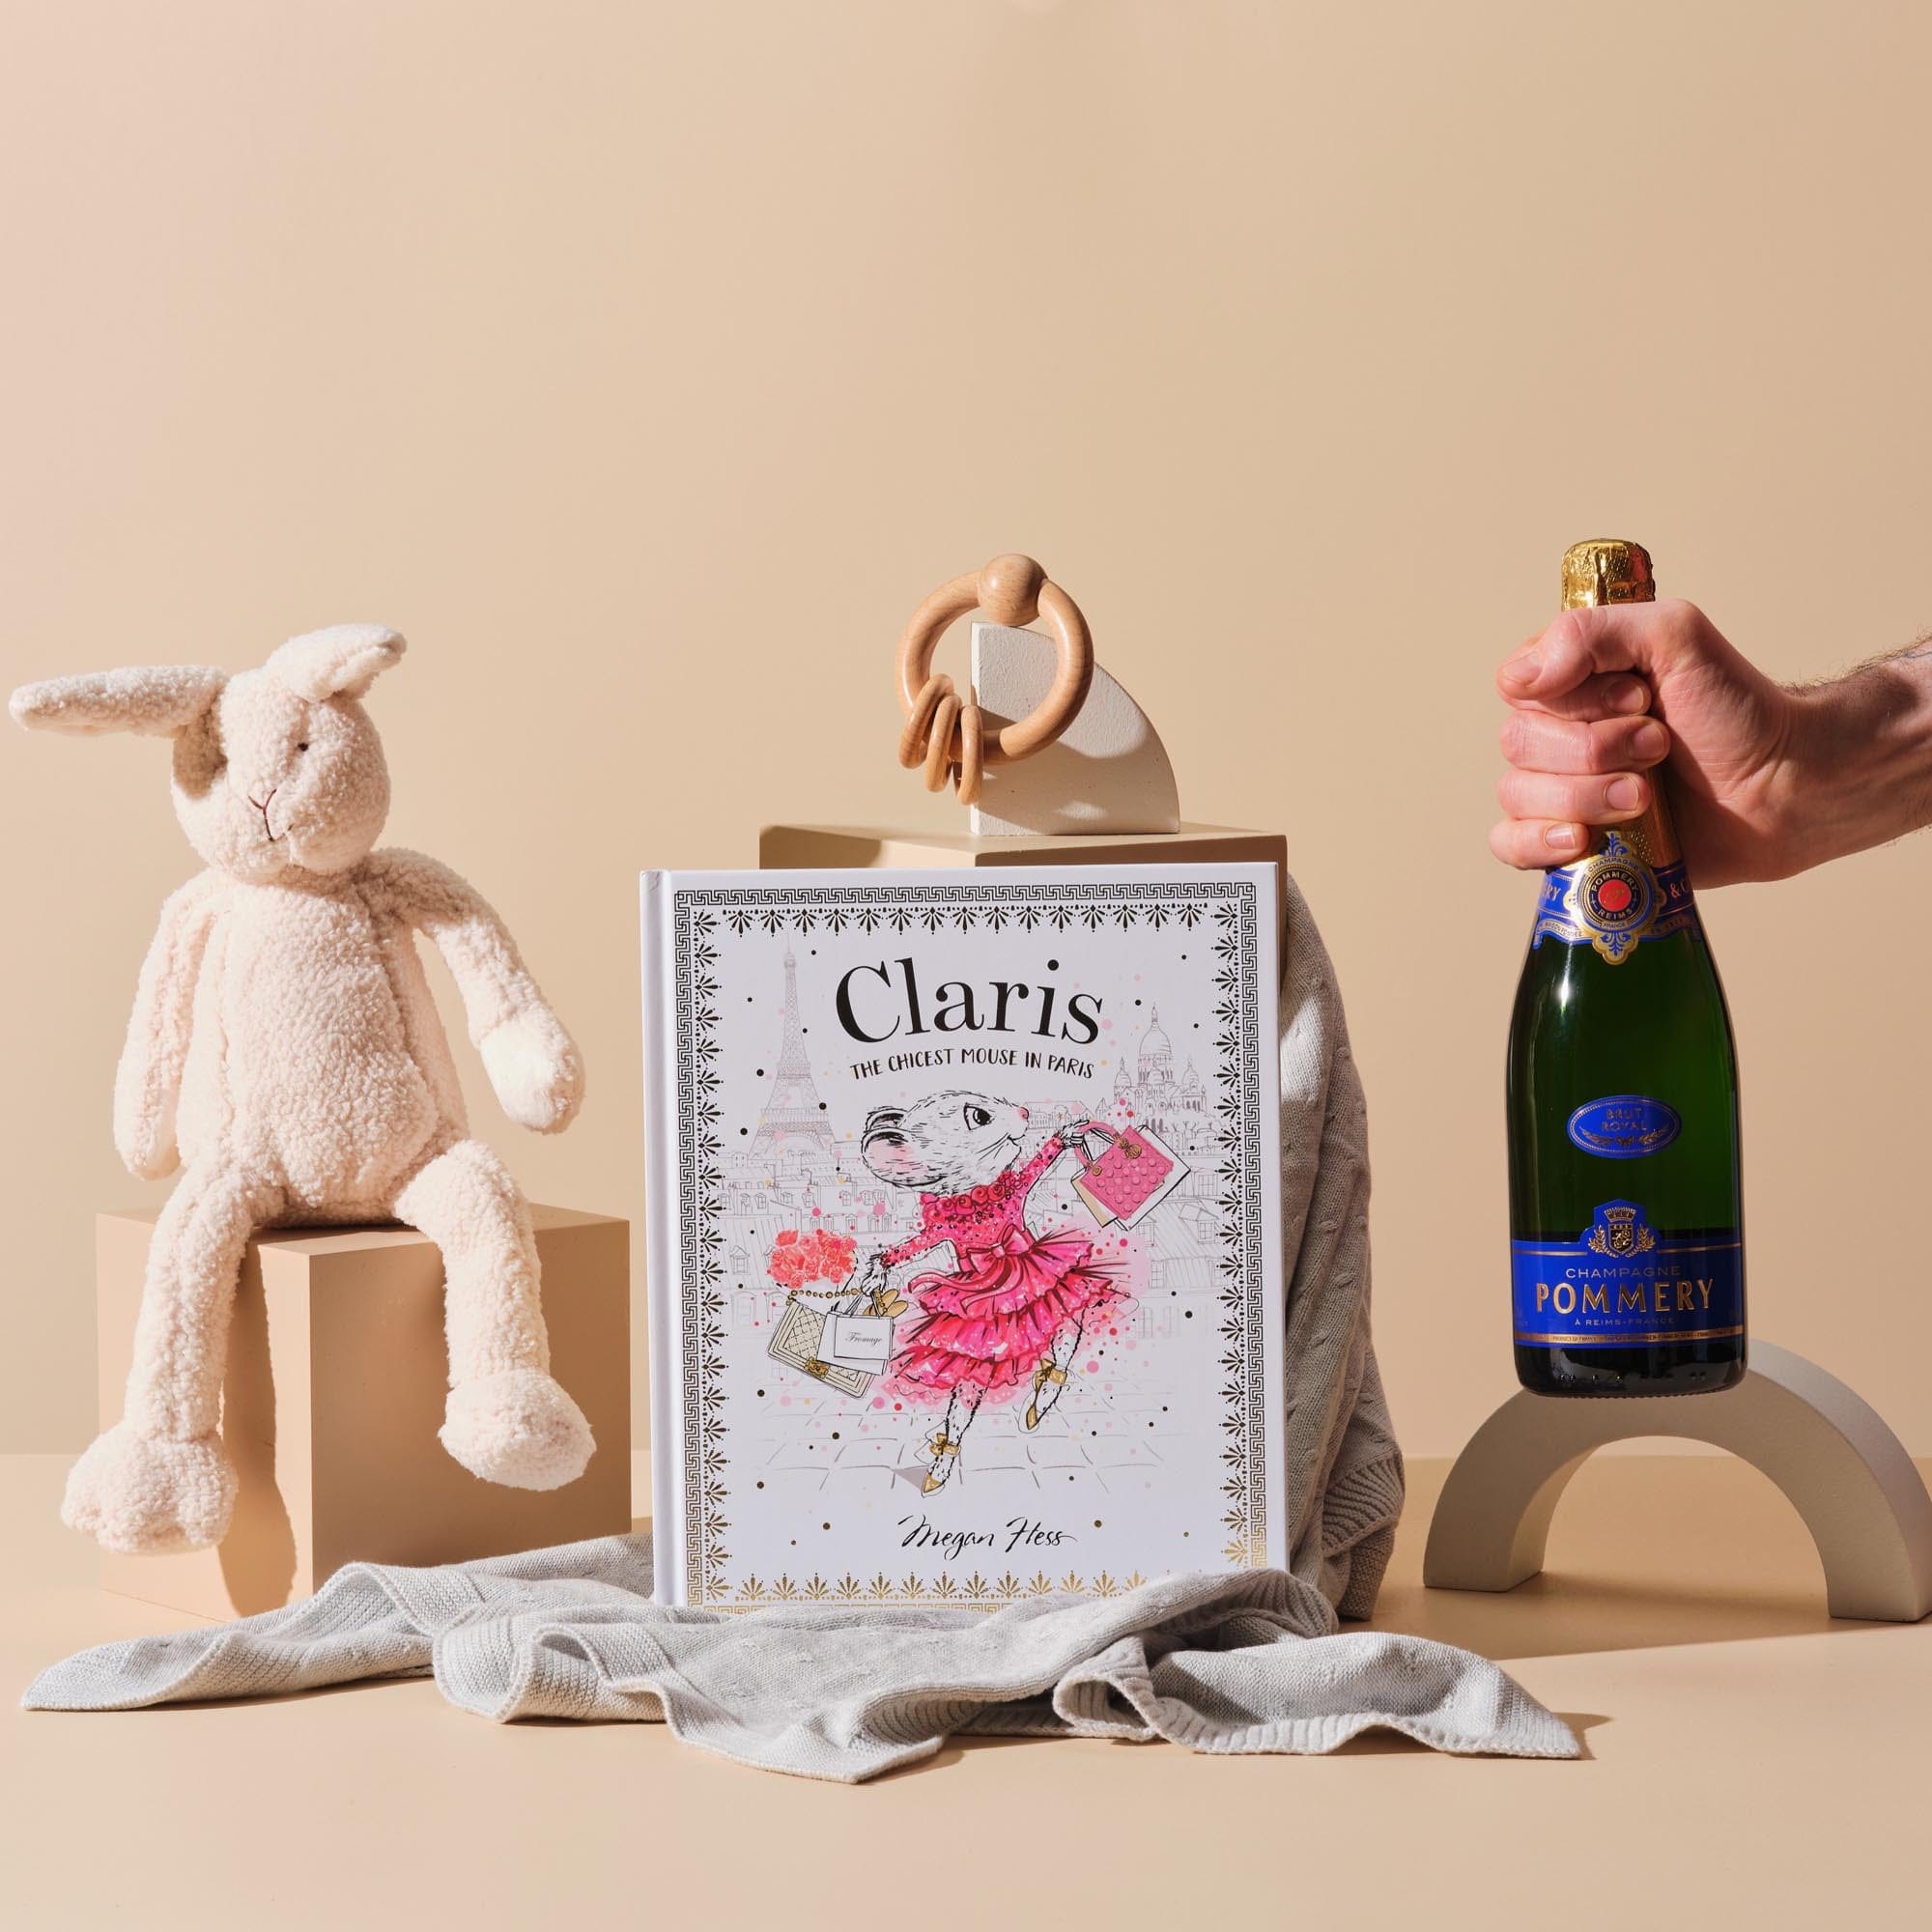 This image is dressed with the Purebaby's Essential Blanket, Bonnie the Bunny toy, Purebaby's Teething Ring and is featuring Claris, the Chicest Mouse in Paris written by Megan Hess. Also included in this image is a gift for Mum; the Champagne Pommery Brut Royal.